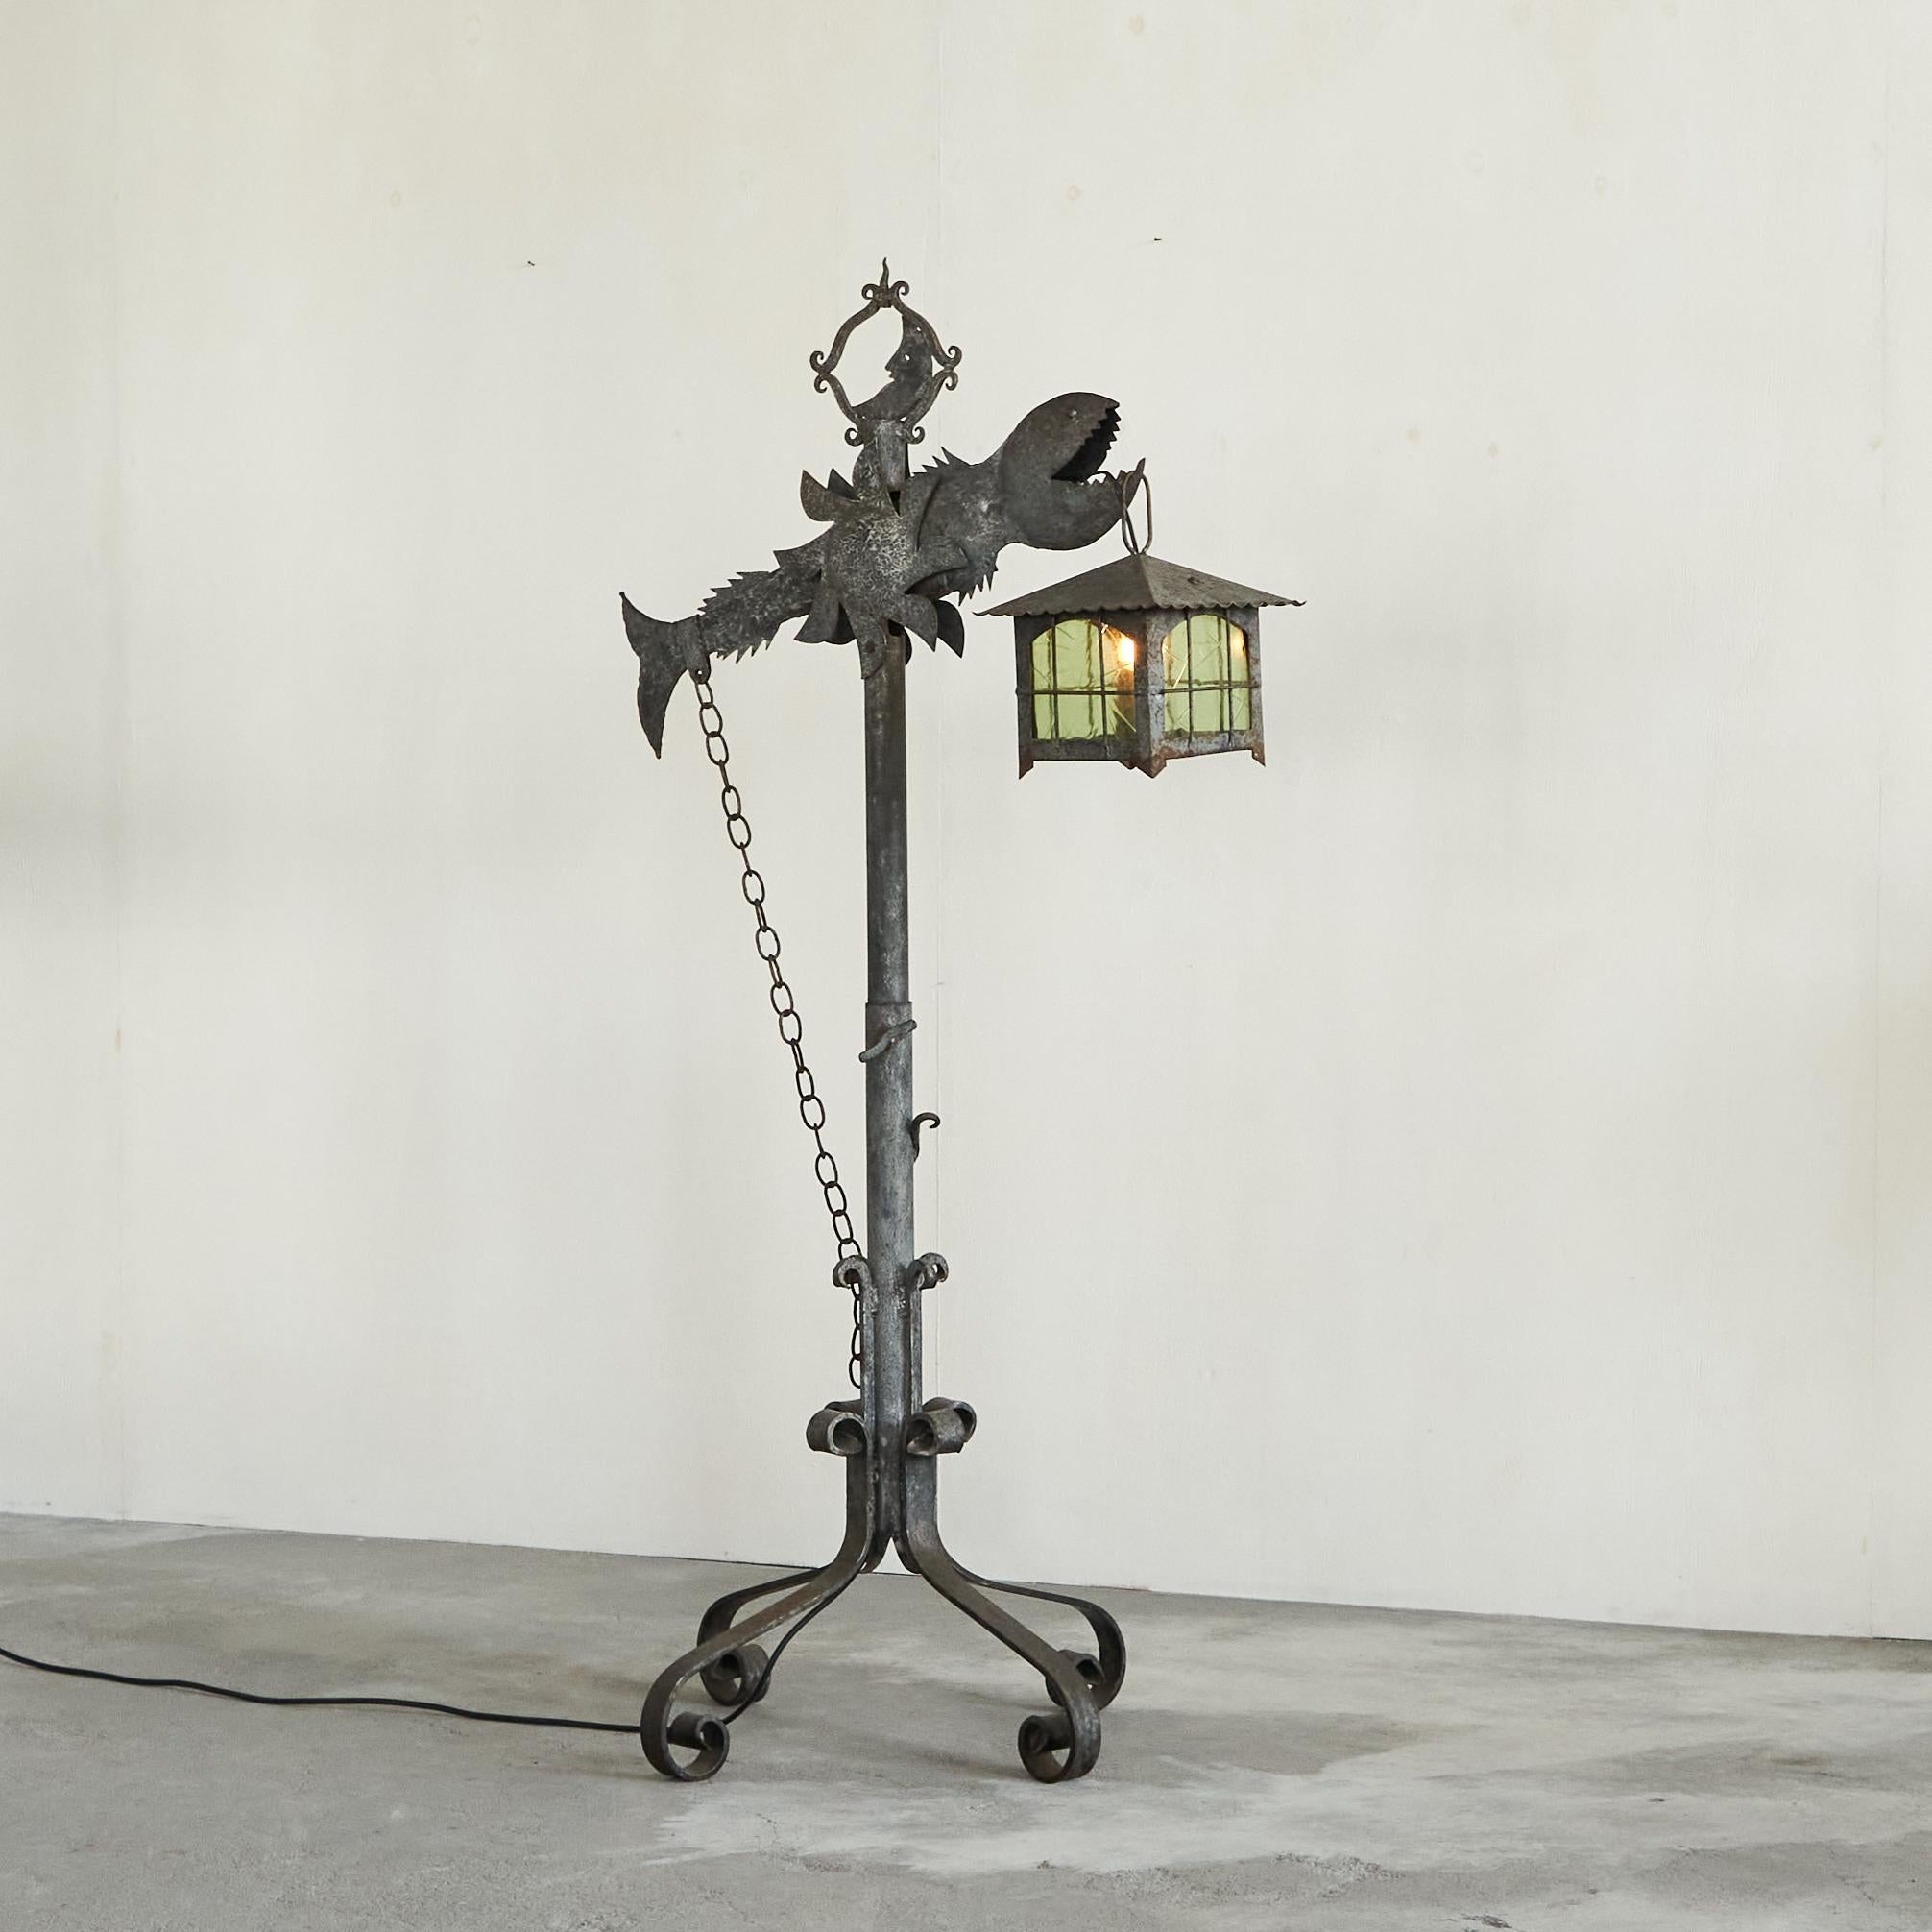 Whimsical and Unique Brutalist Fish Lantern Floor Lamp in Wrought Iron, Europe, 1960s.

And now for something completely different... This unique and highly exceptional fish floor lamp in wrought iron is truly a one-off. A gem of a lamp, made with a